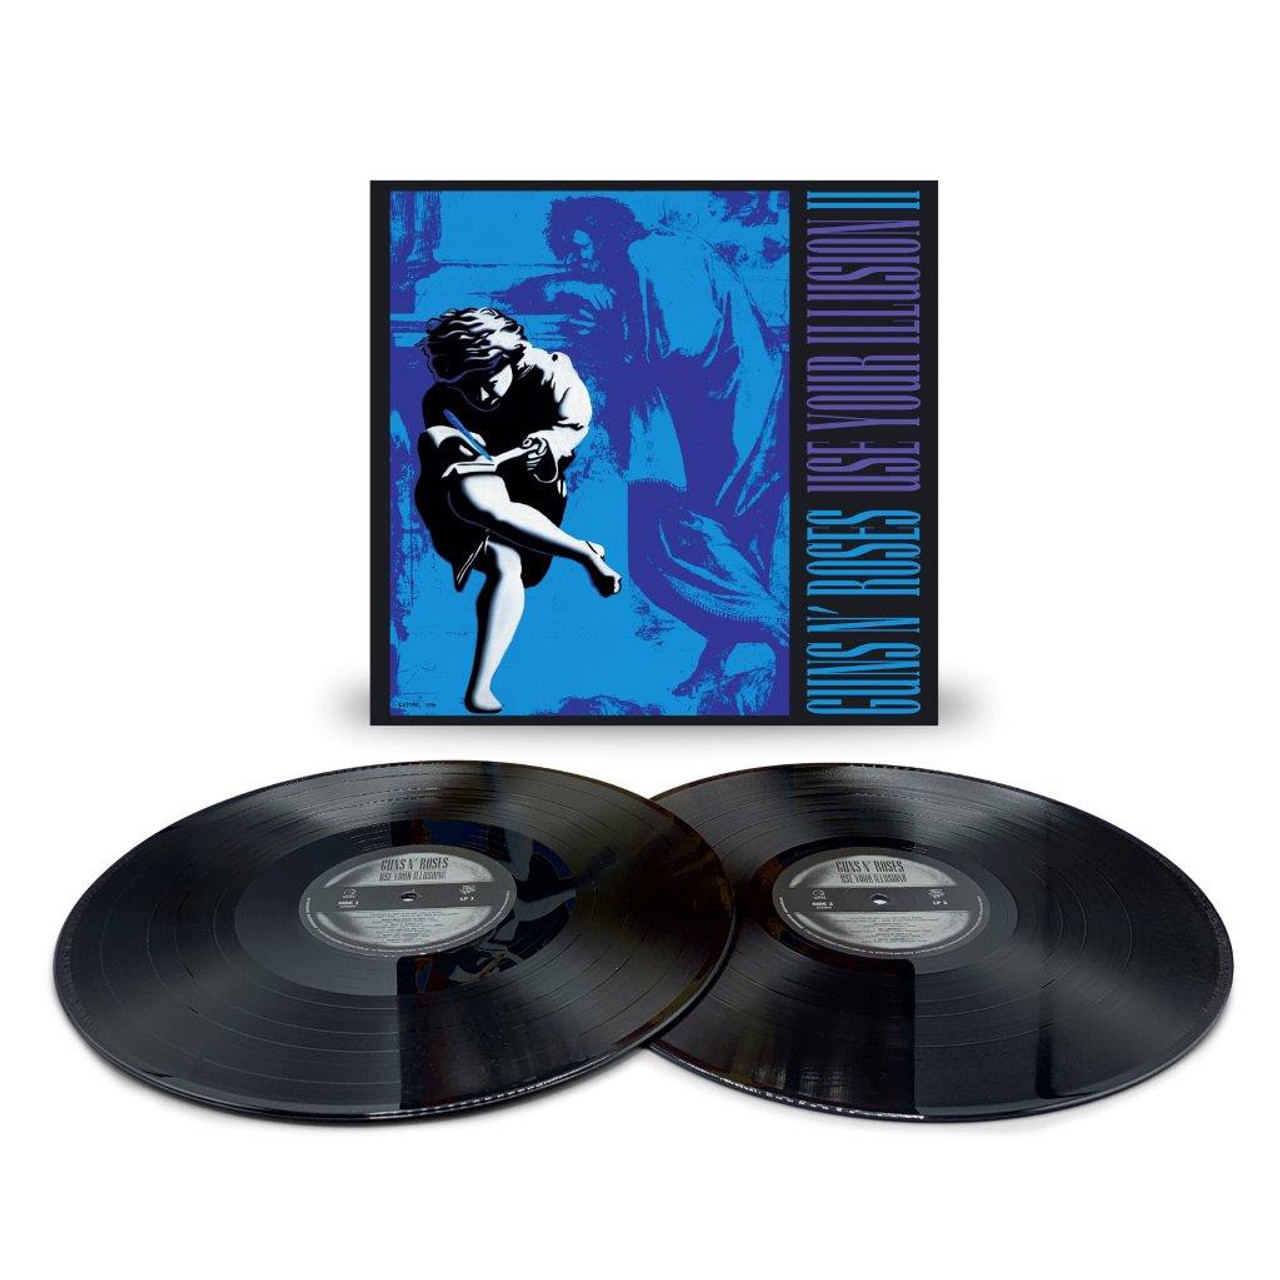 PRE-ORDER - Guns N' Roses 'Use Your Illusion II' 2LP Remastered 180g Black Vinyl - RELEASE DATE 11th November 2022